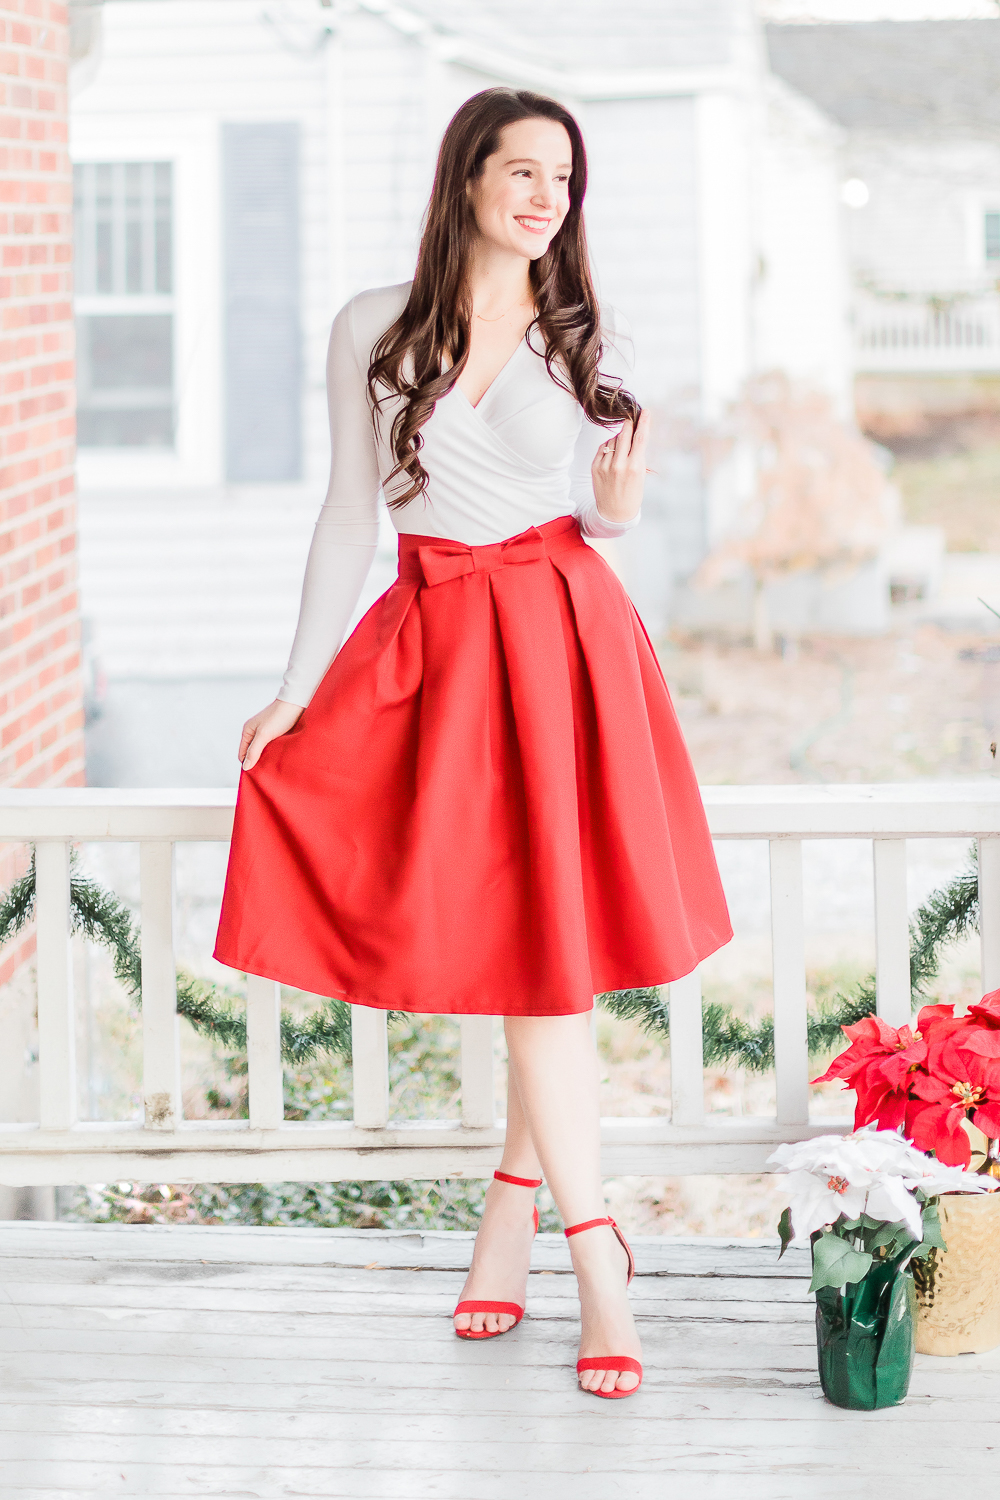 Kate Spade Inspired Holiday Outfit, Amazon red bow skirt, preppy holiday outfit idea, popular affordable fashion blogger Stephanie Ziajka, popular affordable fashion blog Diary of a Debutante